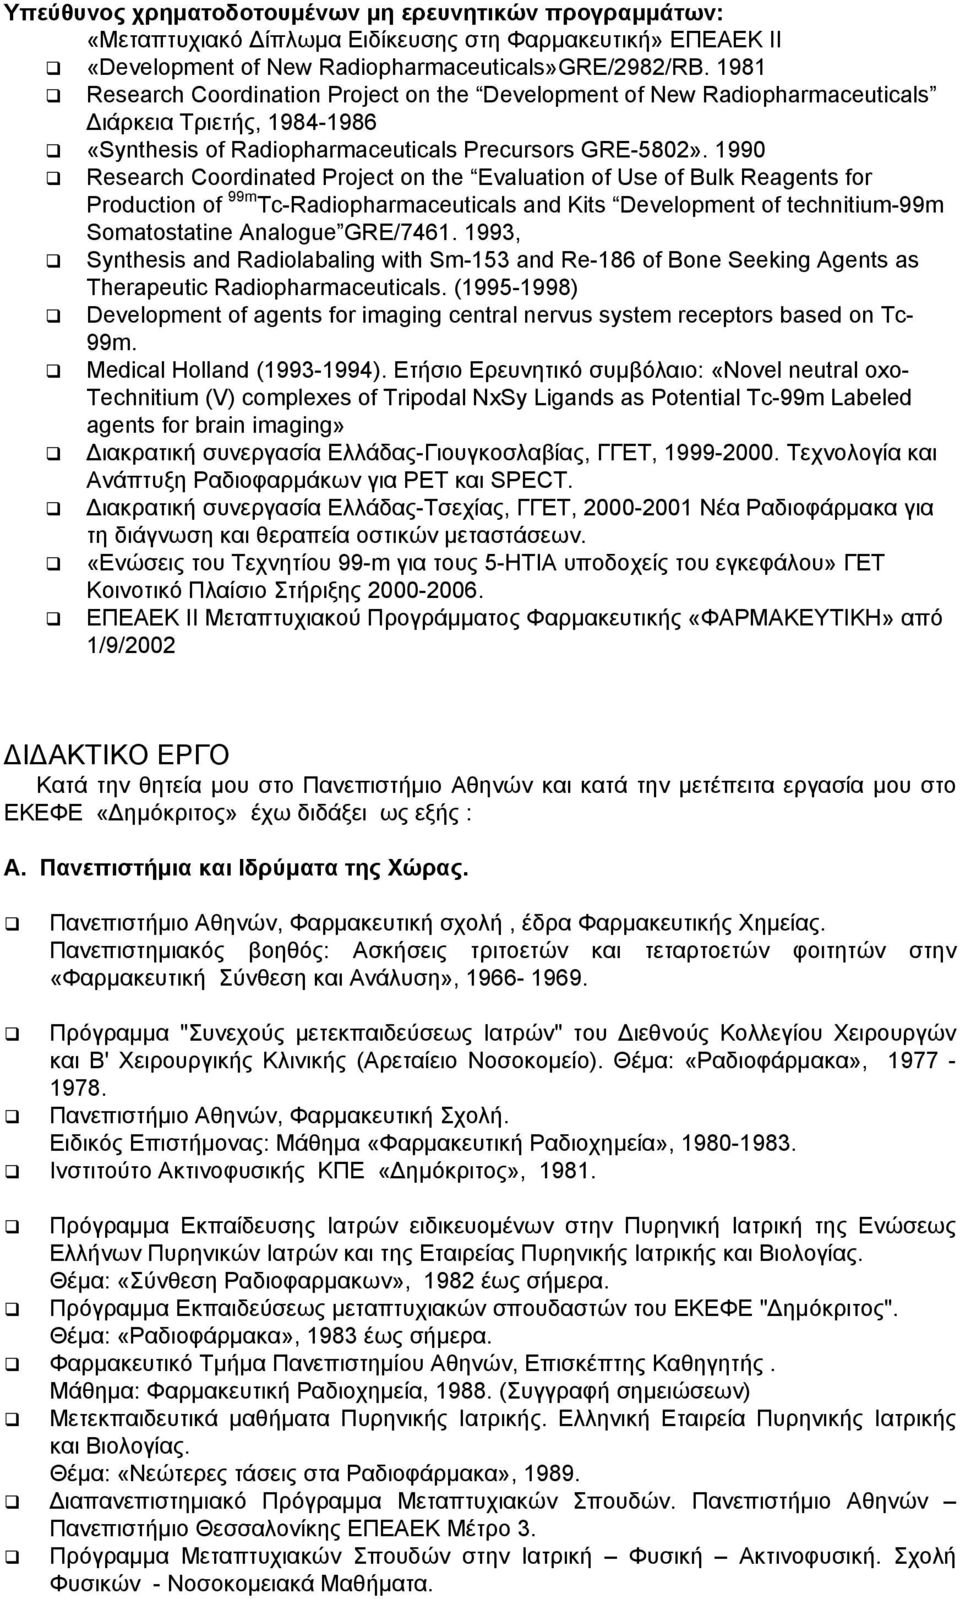 1990 Research Coordinated Project on the Evaluation of Use of Bulk Reagents for Production of 99m Tc-Radiopharmaceuticals and Kits Development of technitium-99m Somatostatine Analogue GRE/7461.